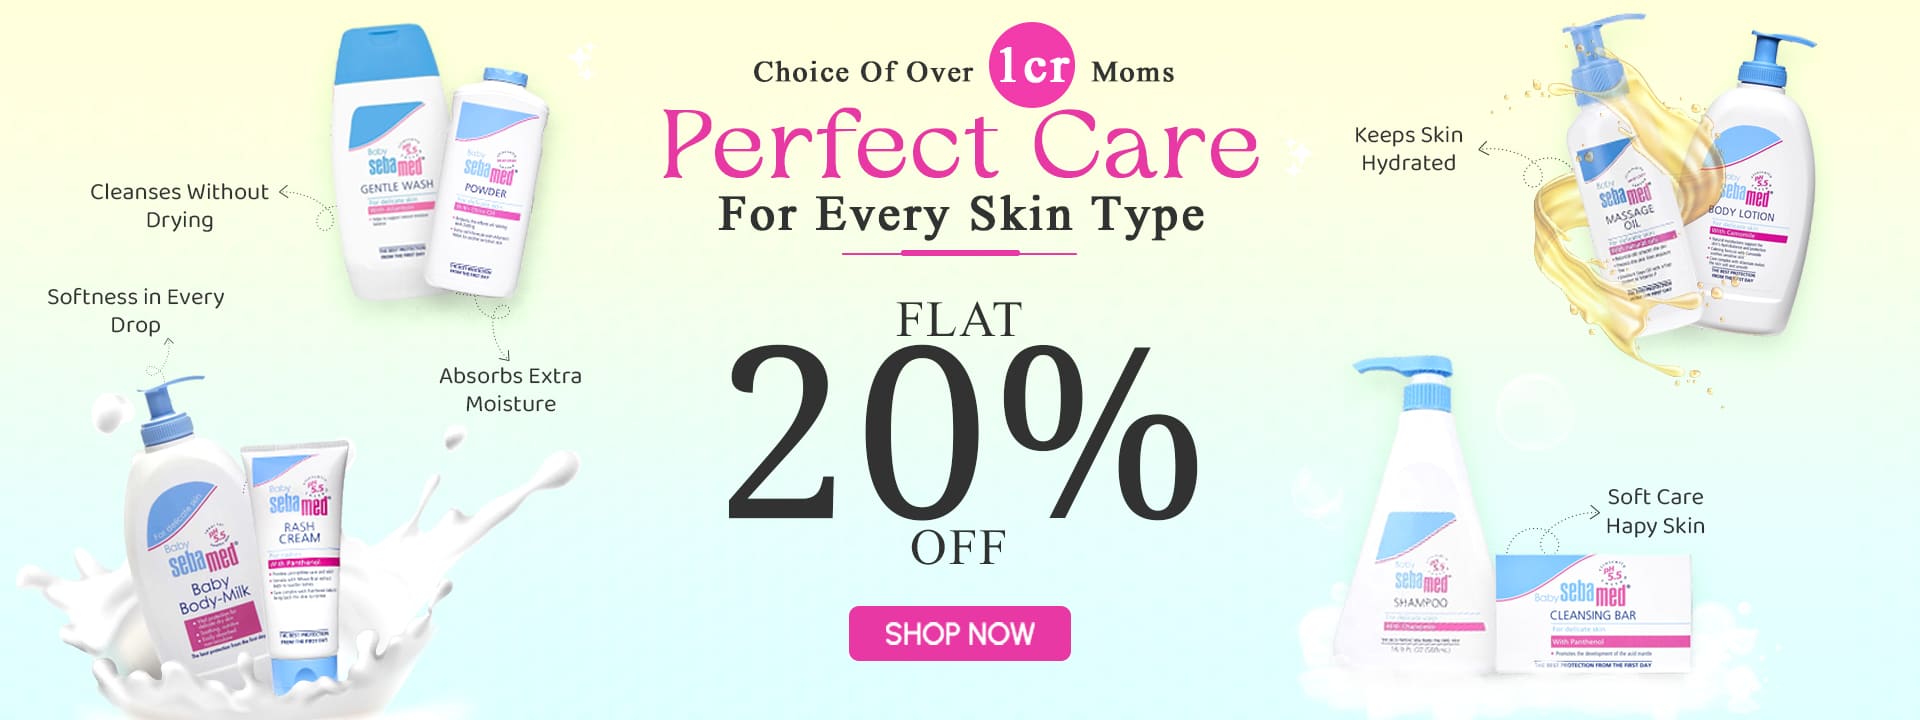 BABY SKIN CARE PRODUCTS